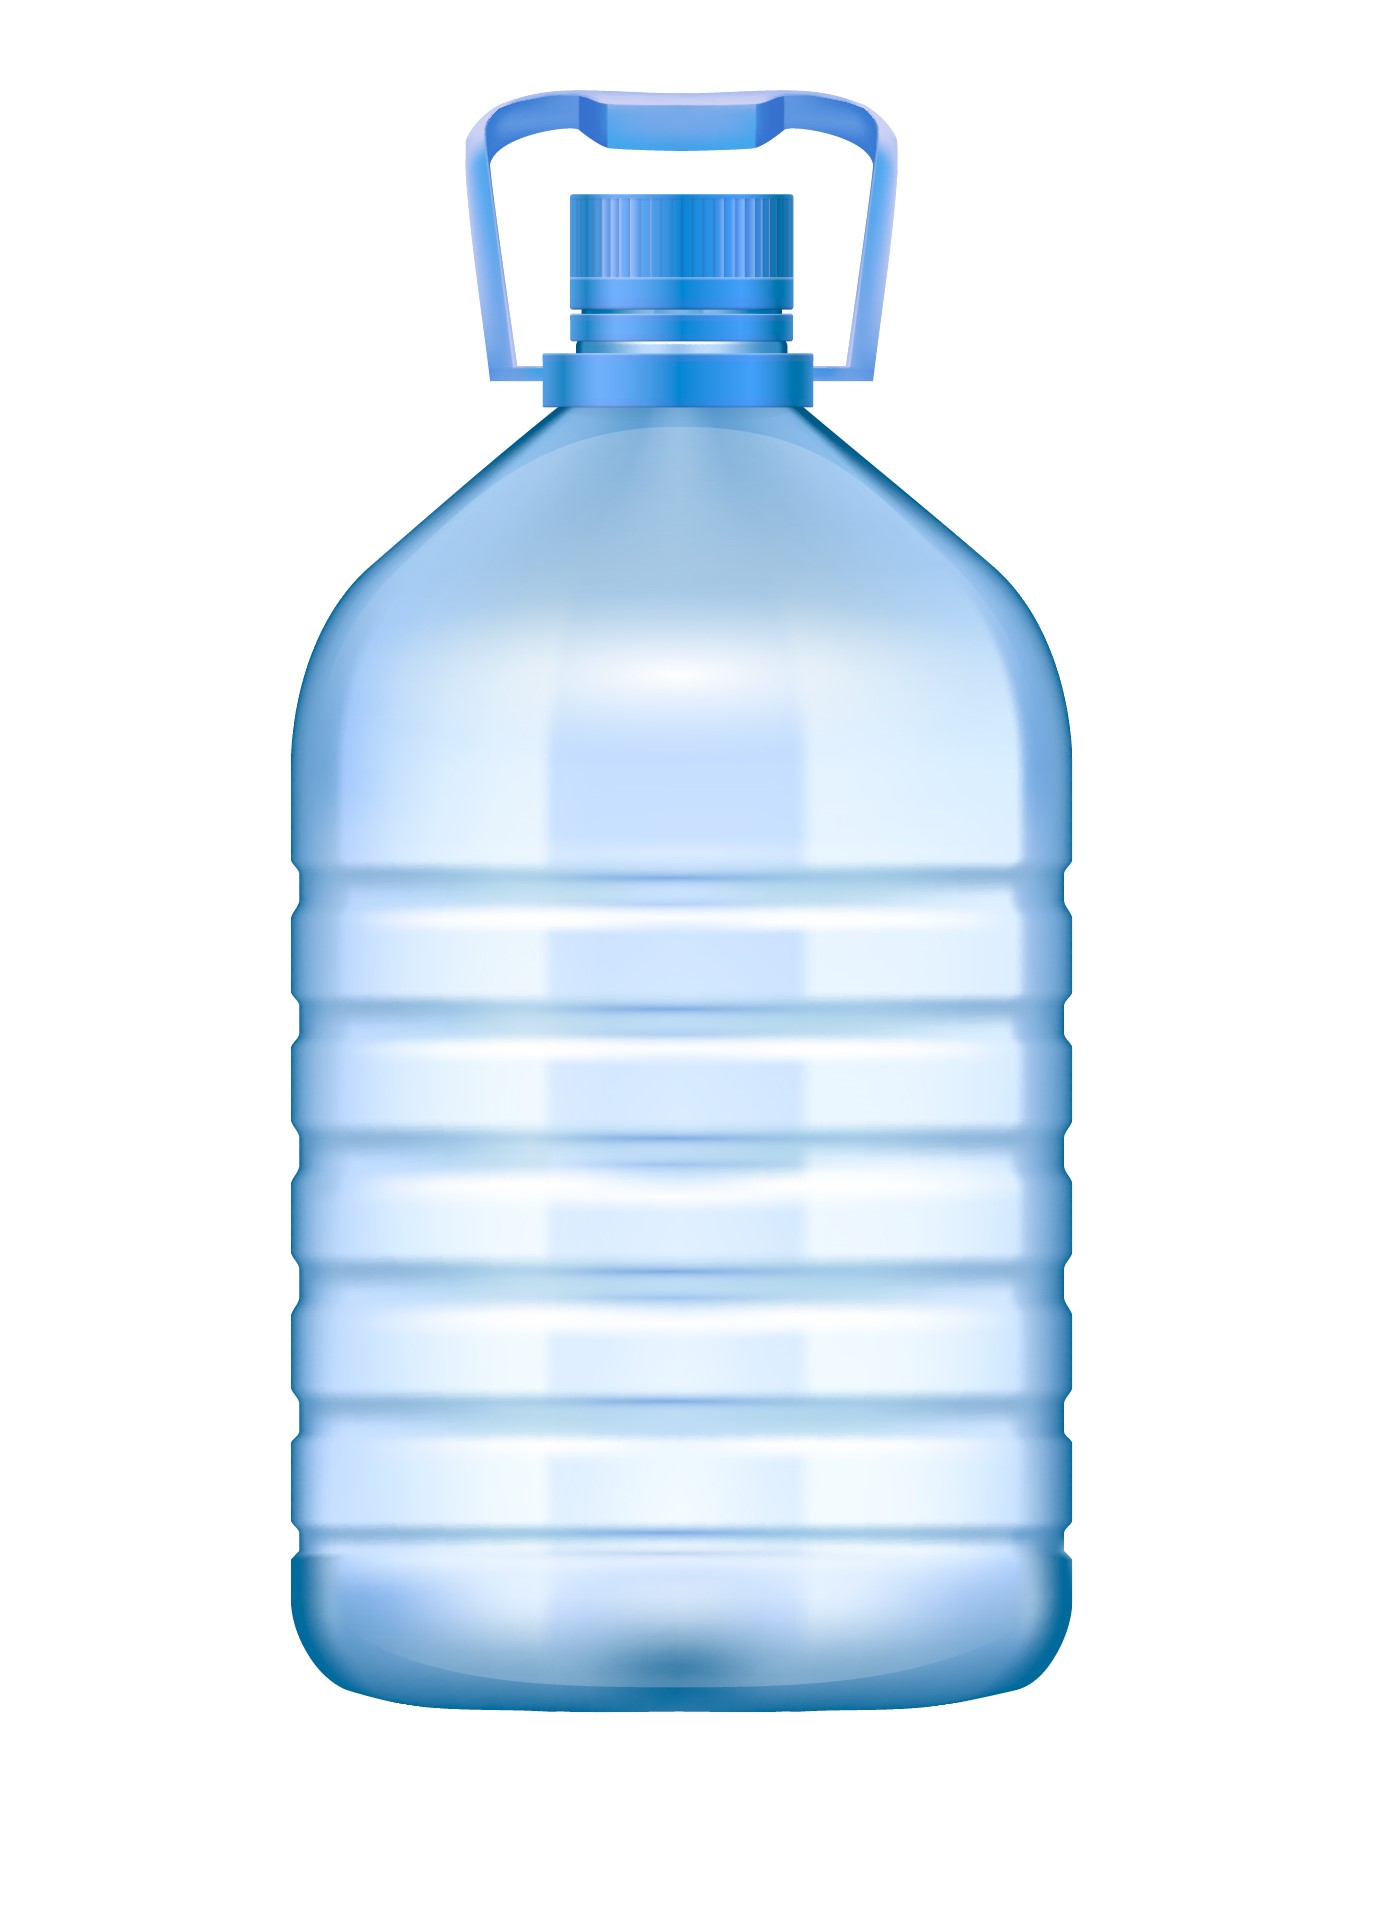 Image of a four litre bottle of water